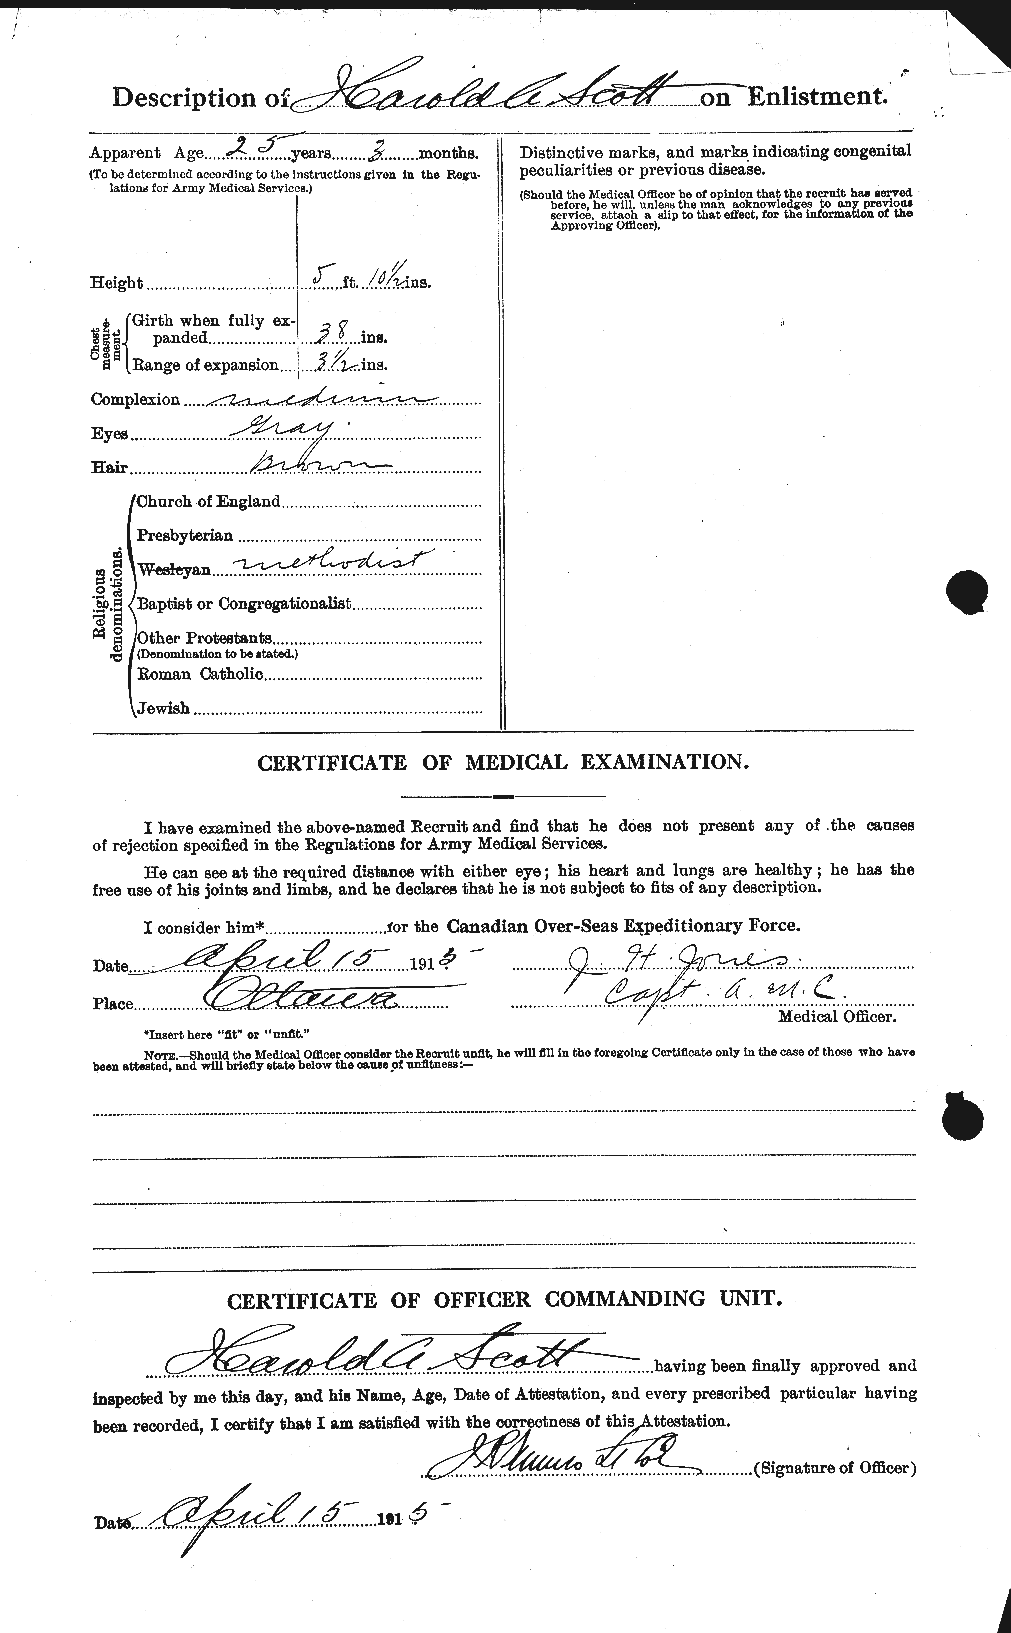 Personnel Records of the First World War - CEF 086341b